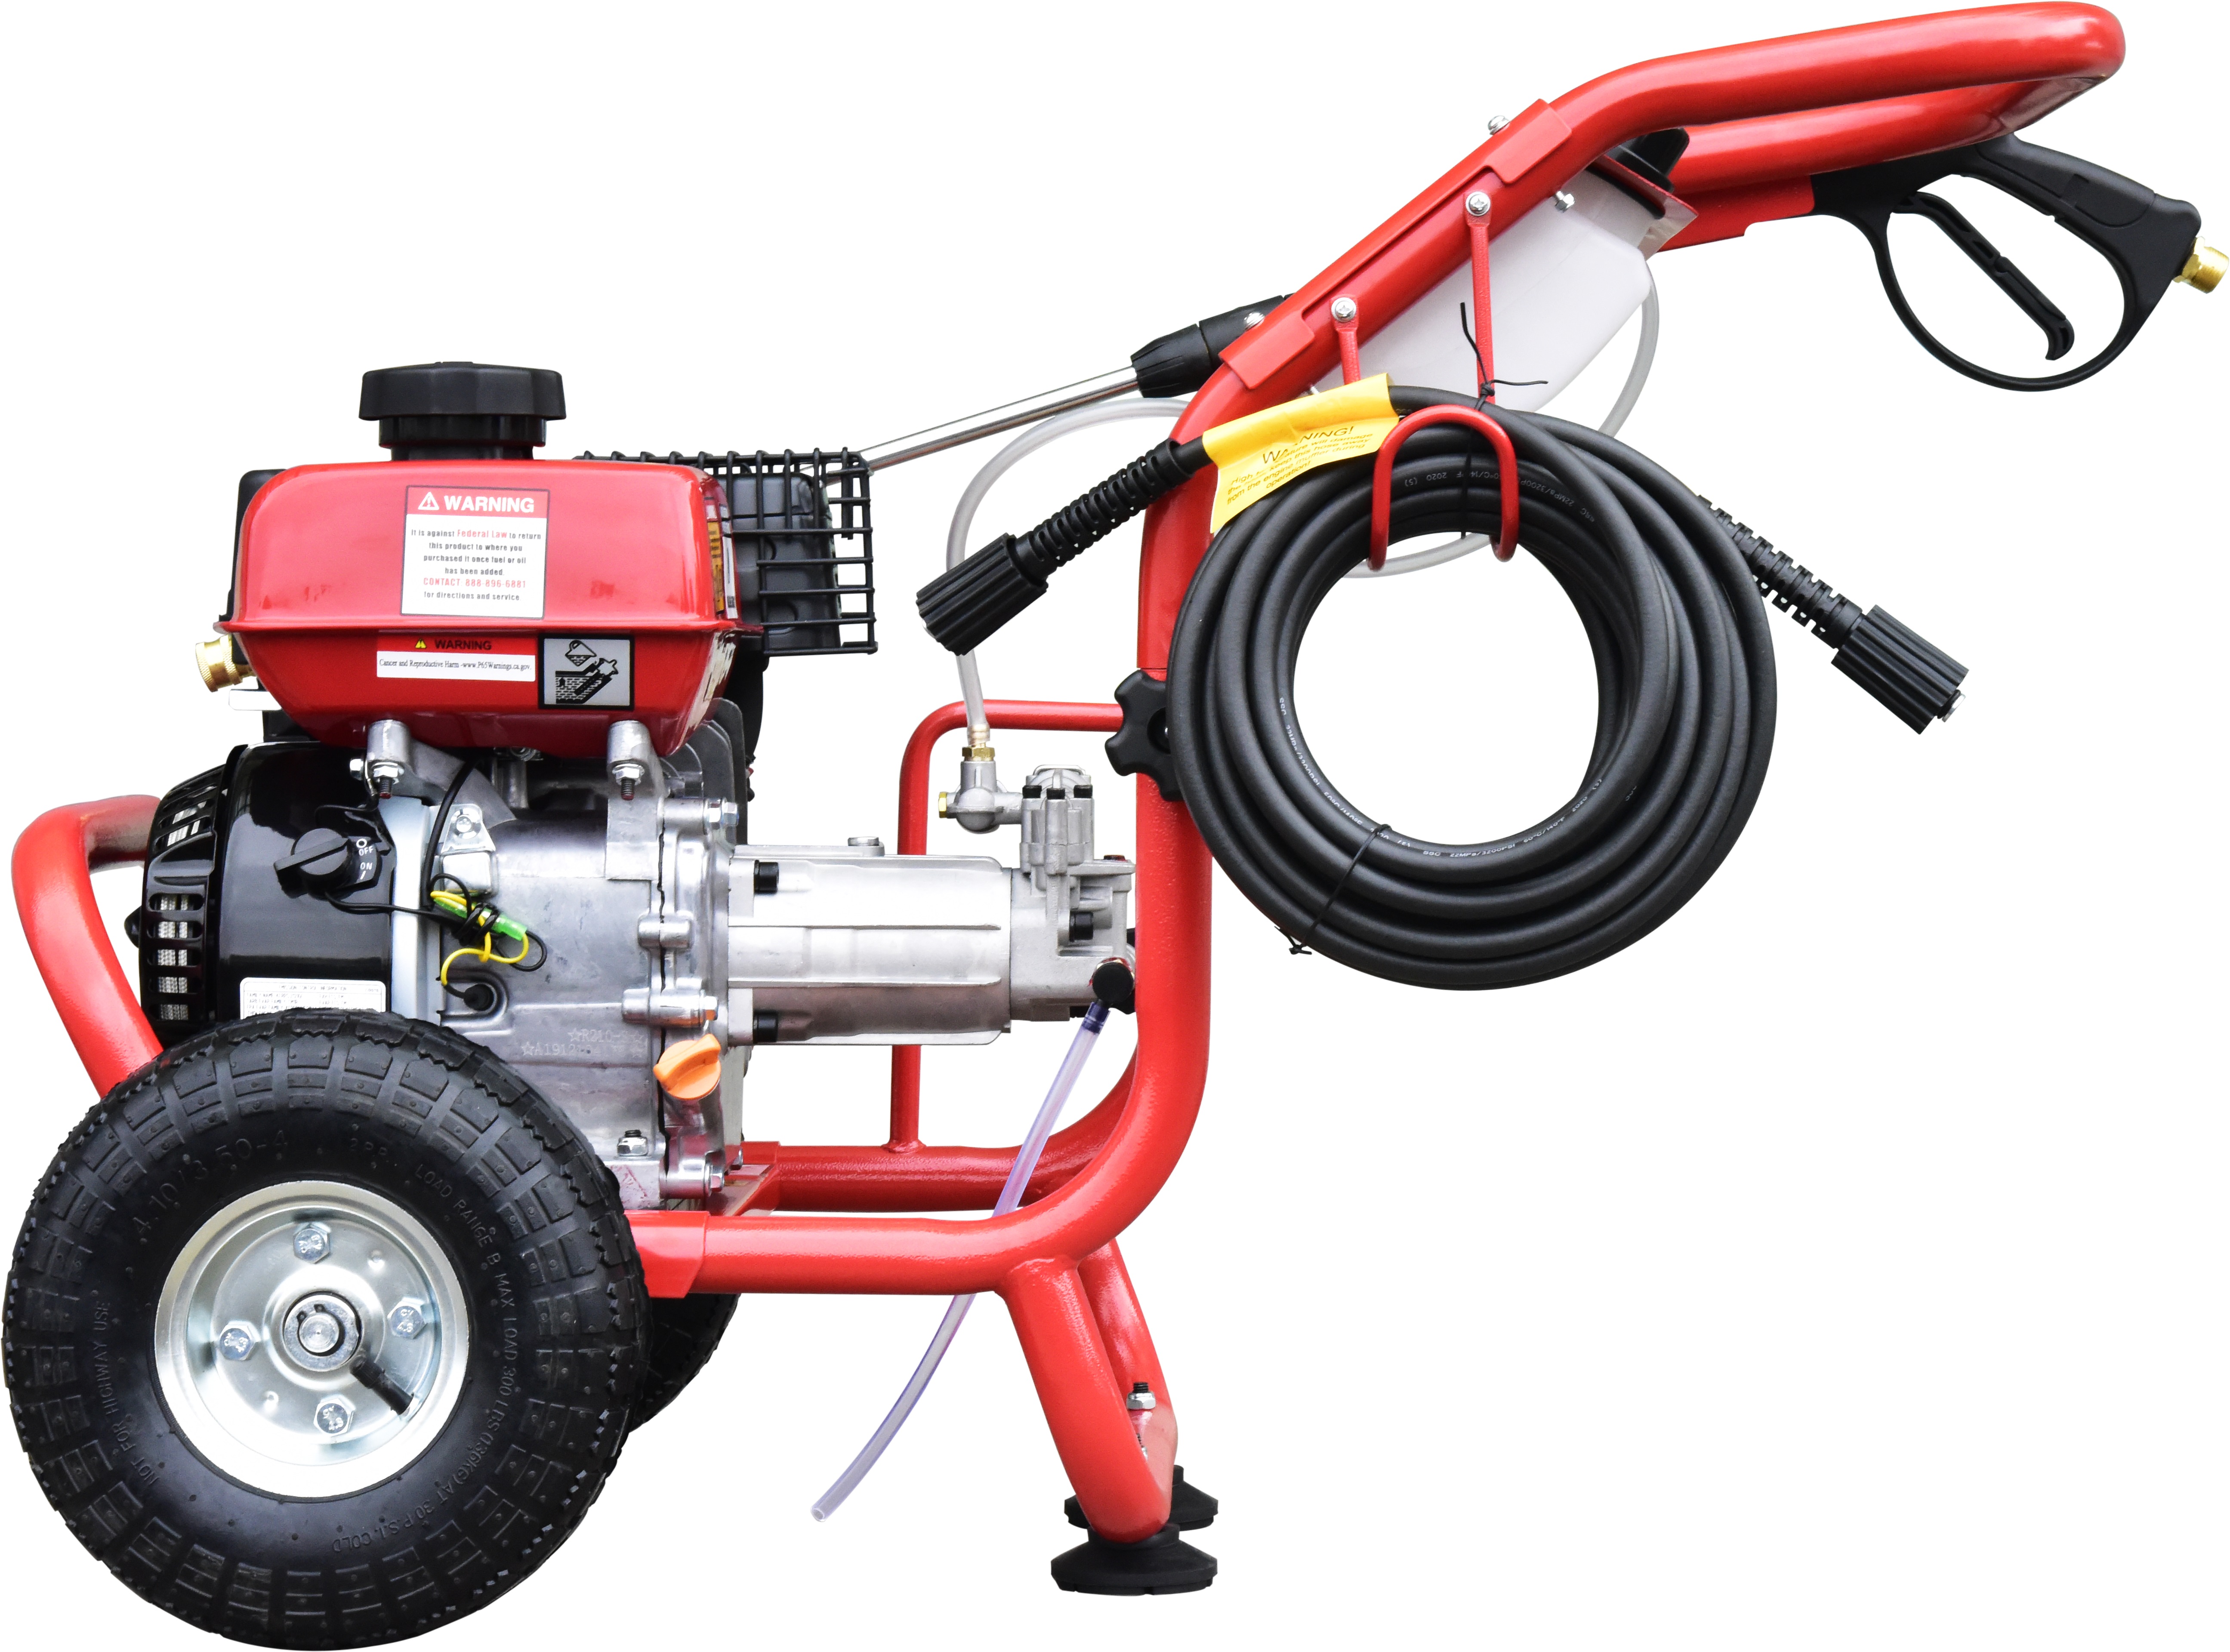 All Power America 3100 PSI, 2.6 GPM Gas Pressure Washer w/ 30 ft High Pressure Hose, C.A.R.B. Compliant, APW5118A - image 5 of 6